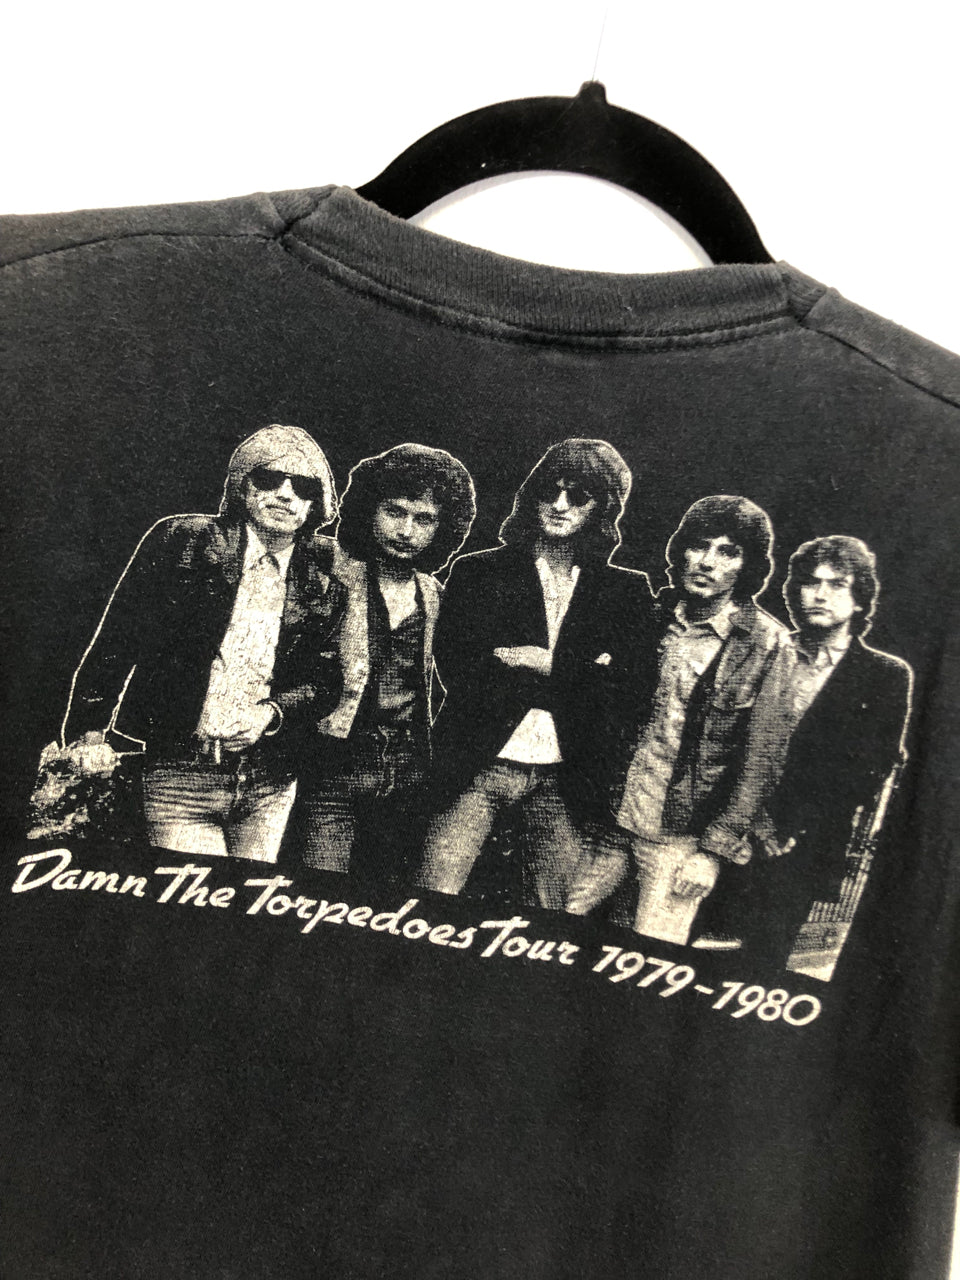 Tom Petty and the Heartbreakers "Damn The Torpedoes" Tour 1979-1980 T-Shirt